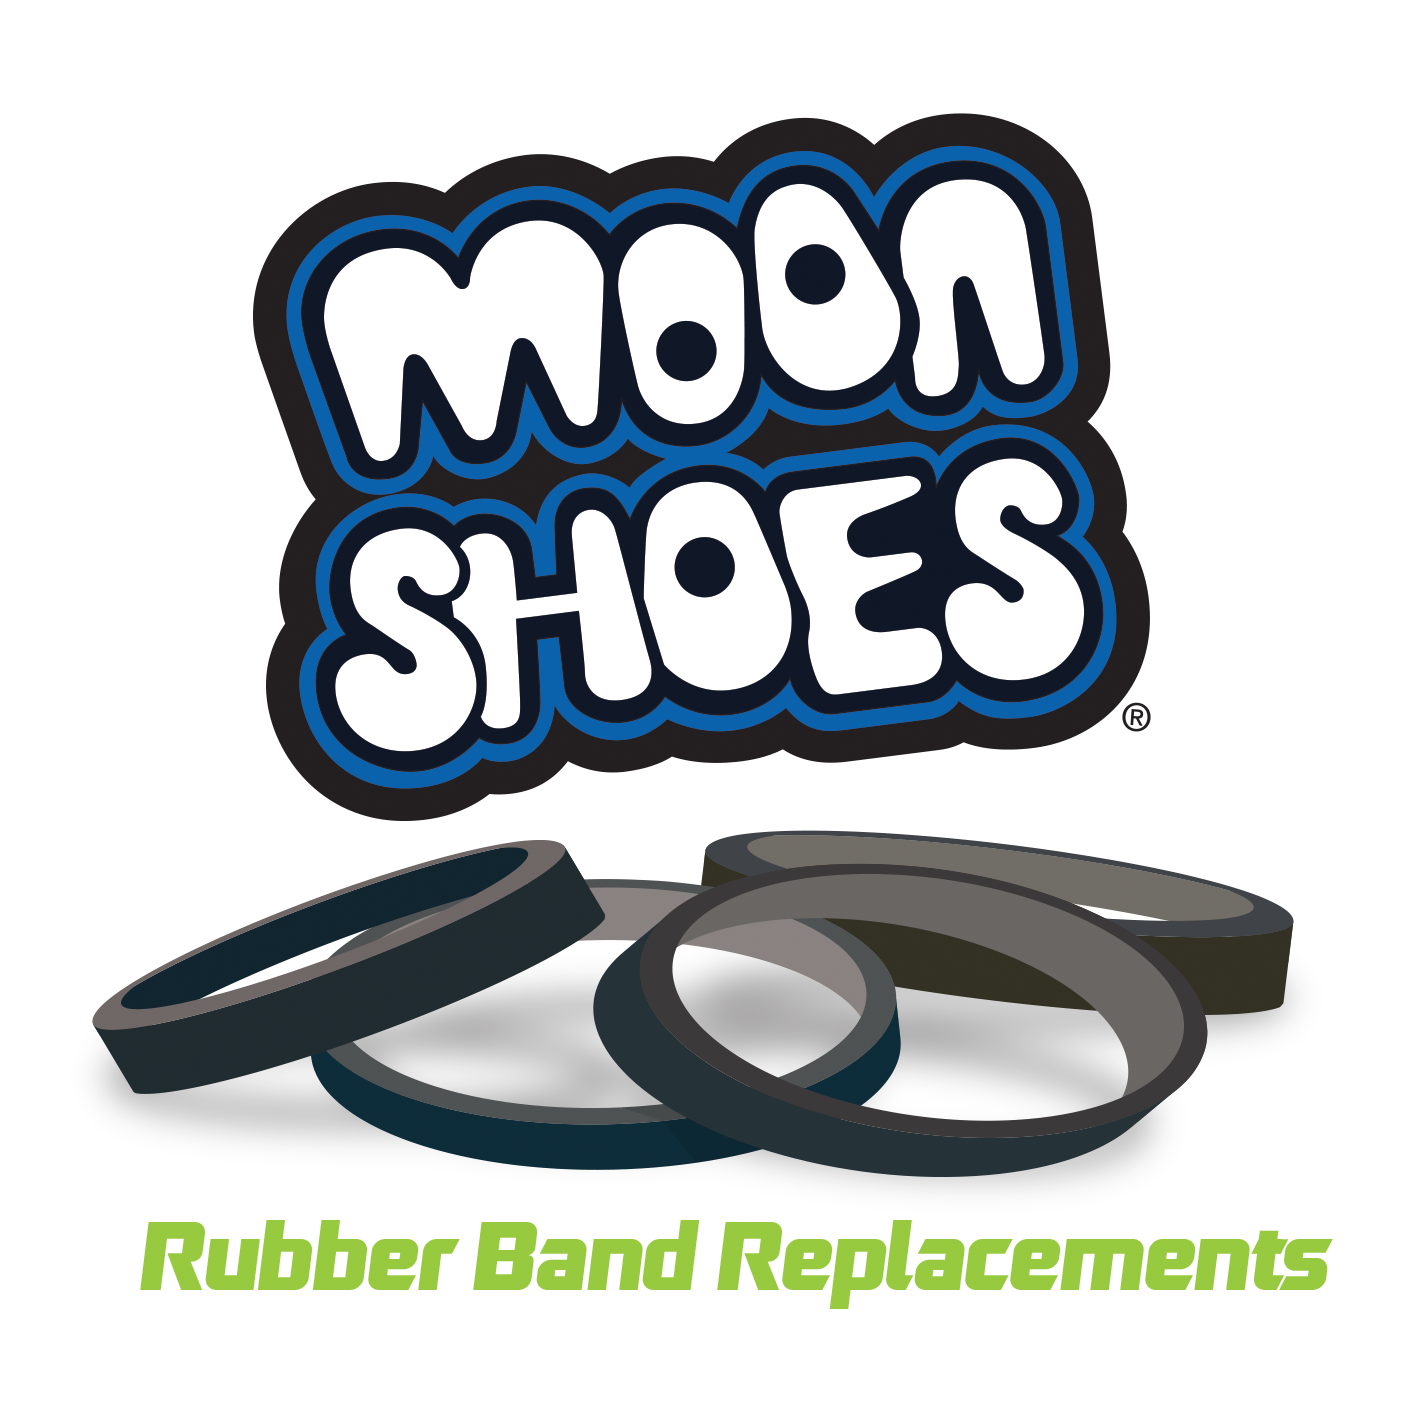 MOONSHOES_rubberbandsLOGO.png